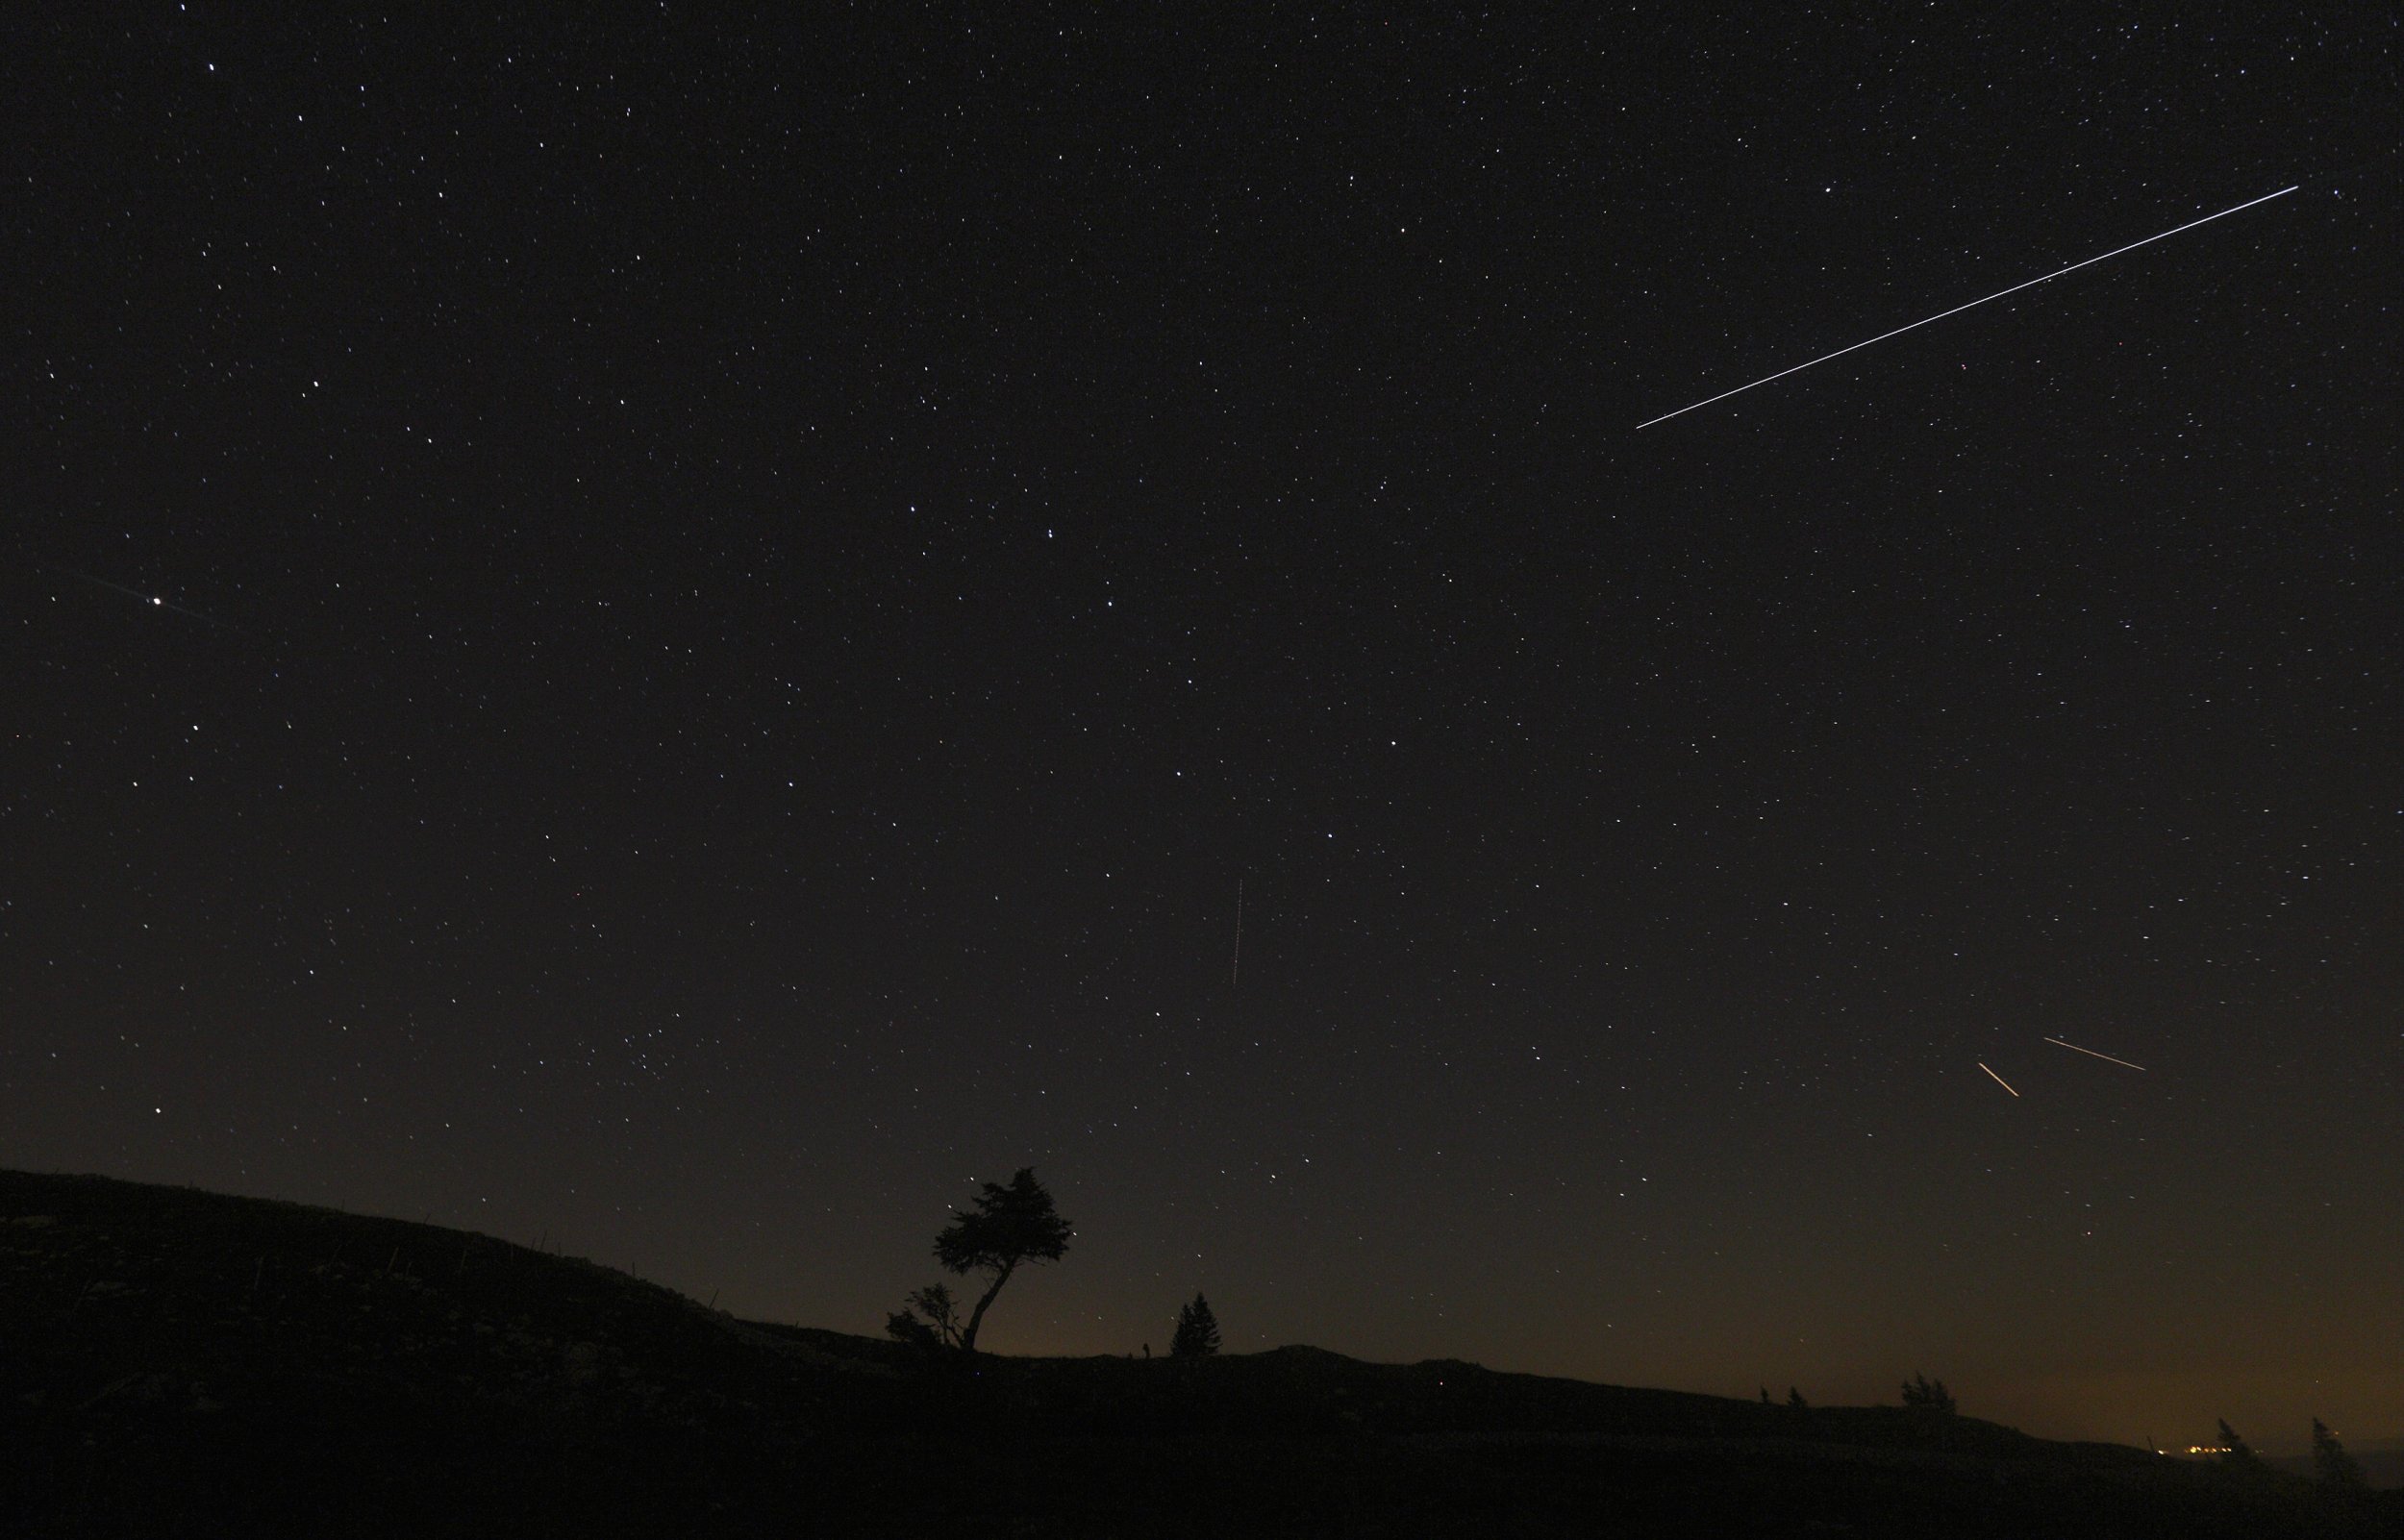 Skywatching Don't Miss The Lyrids Meteor Shower Peak This Week